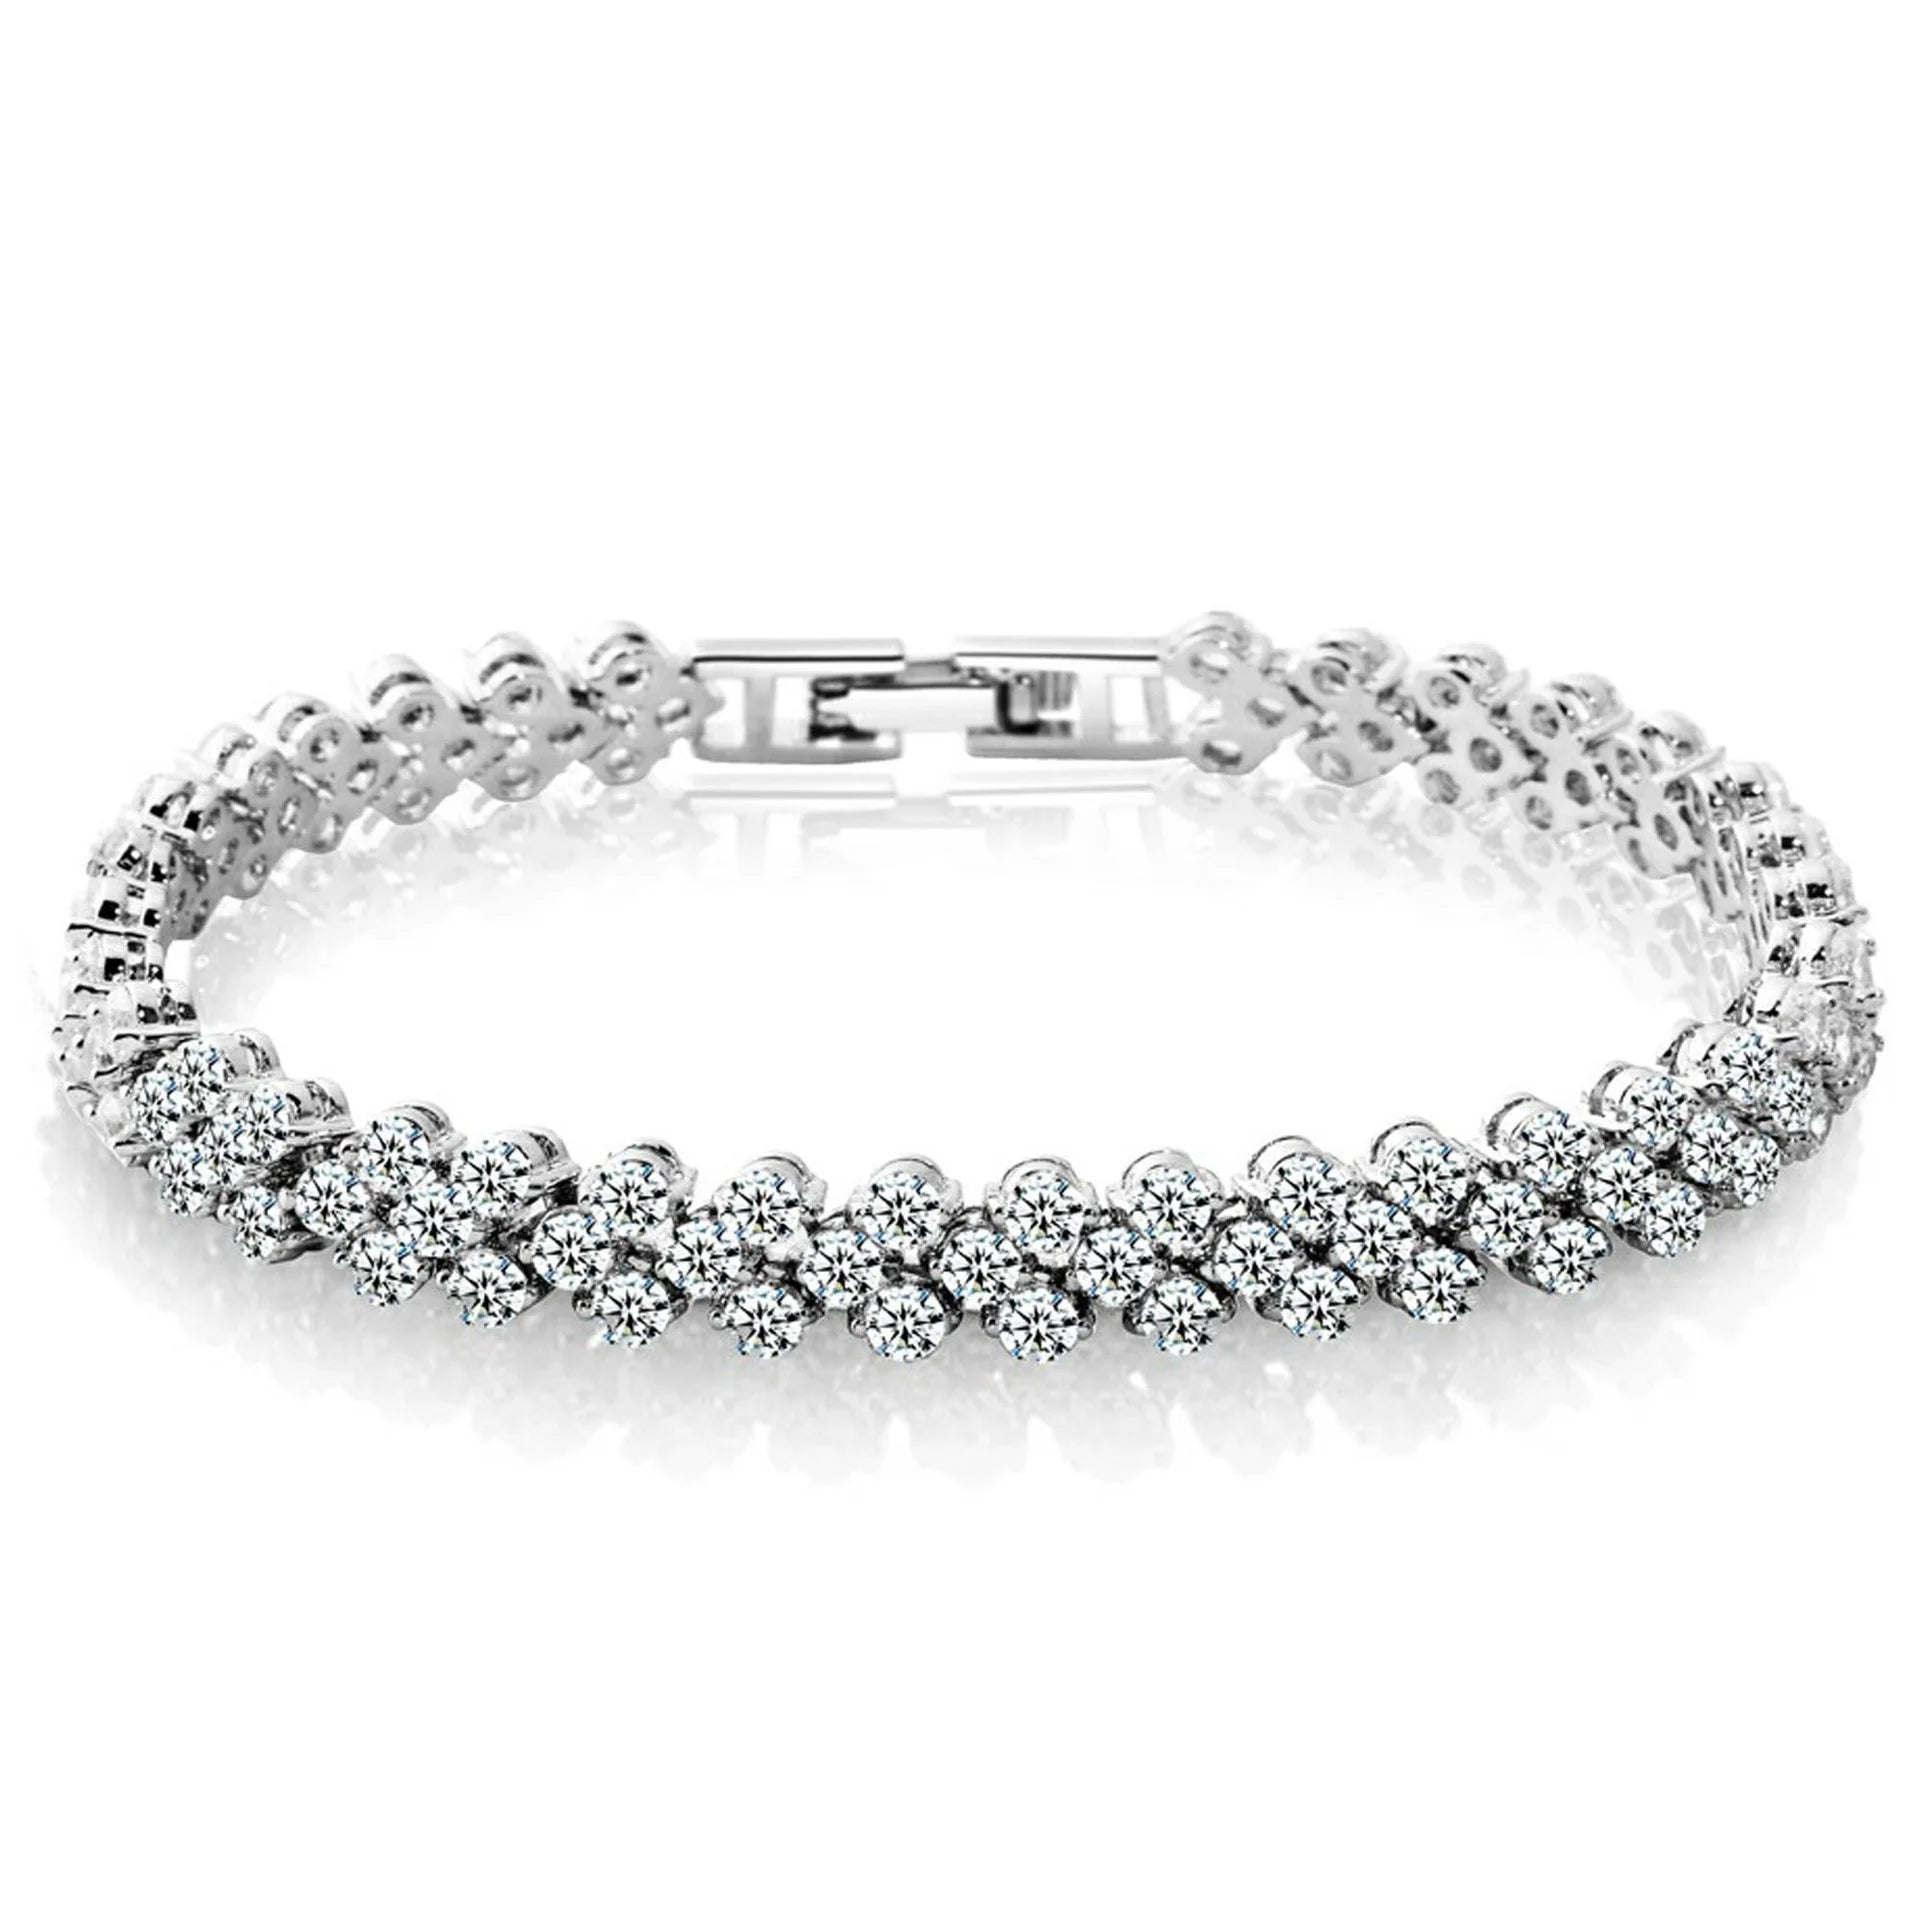 Exquisite Love Braided Leaf Bracelet - Luxurious Sparkling Rhinestones and Dazzling Cubic Zirconia for Women and Girls